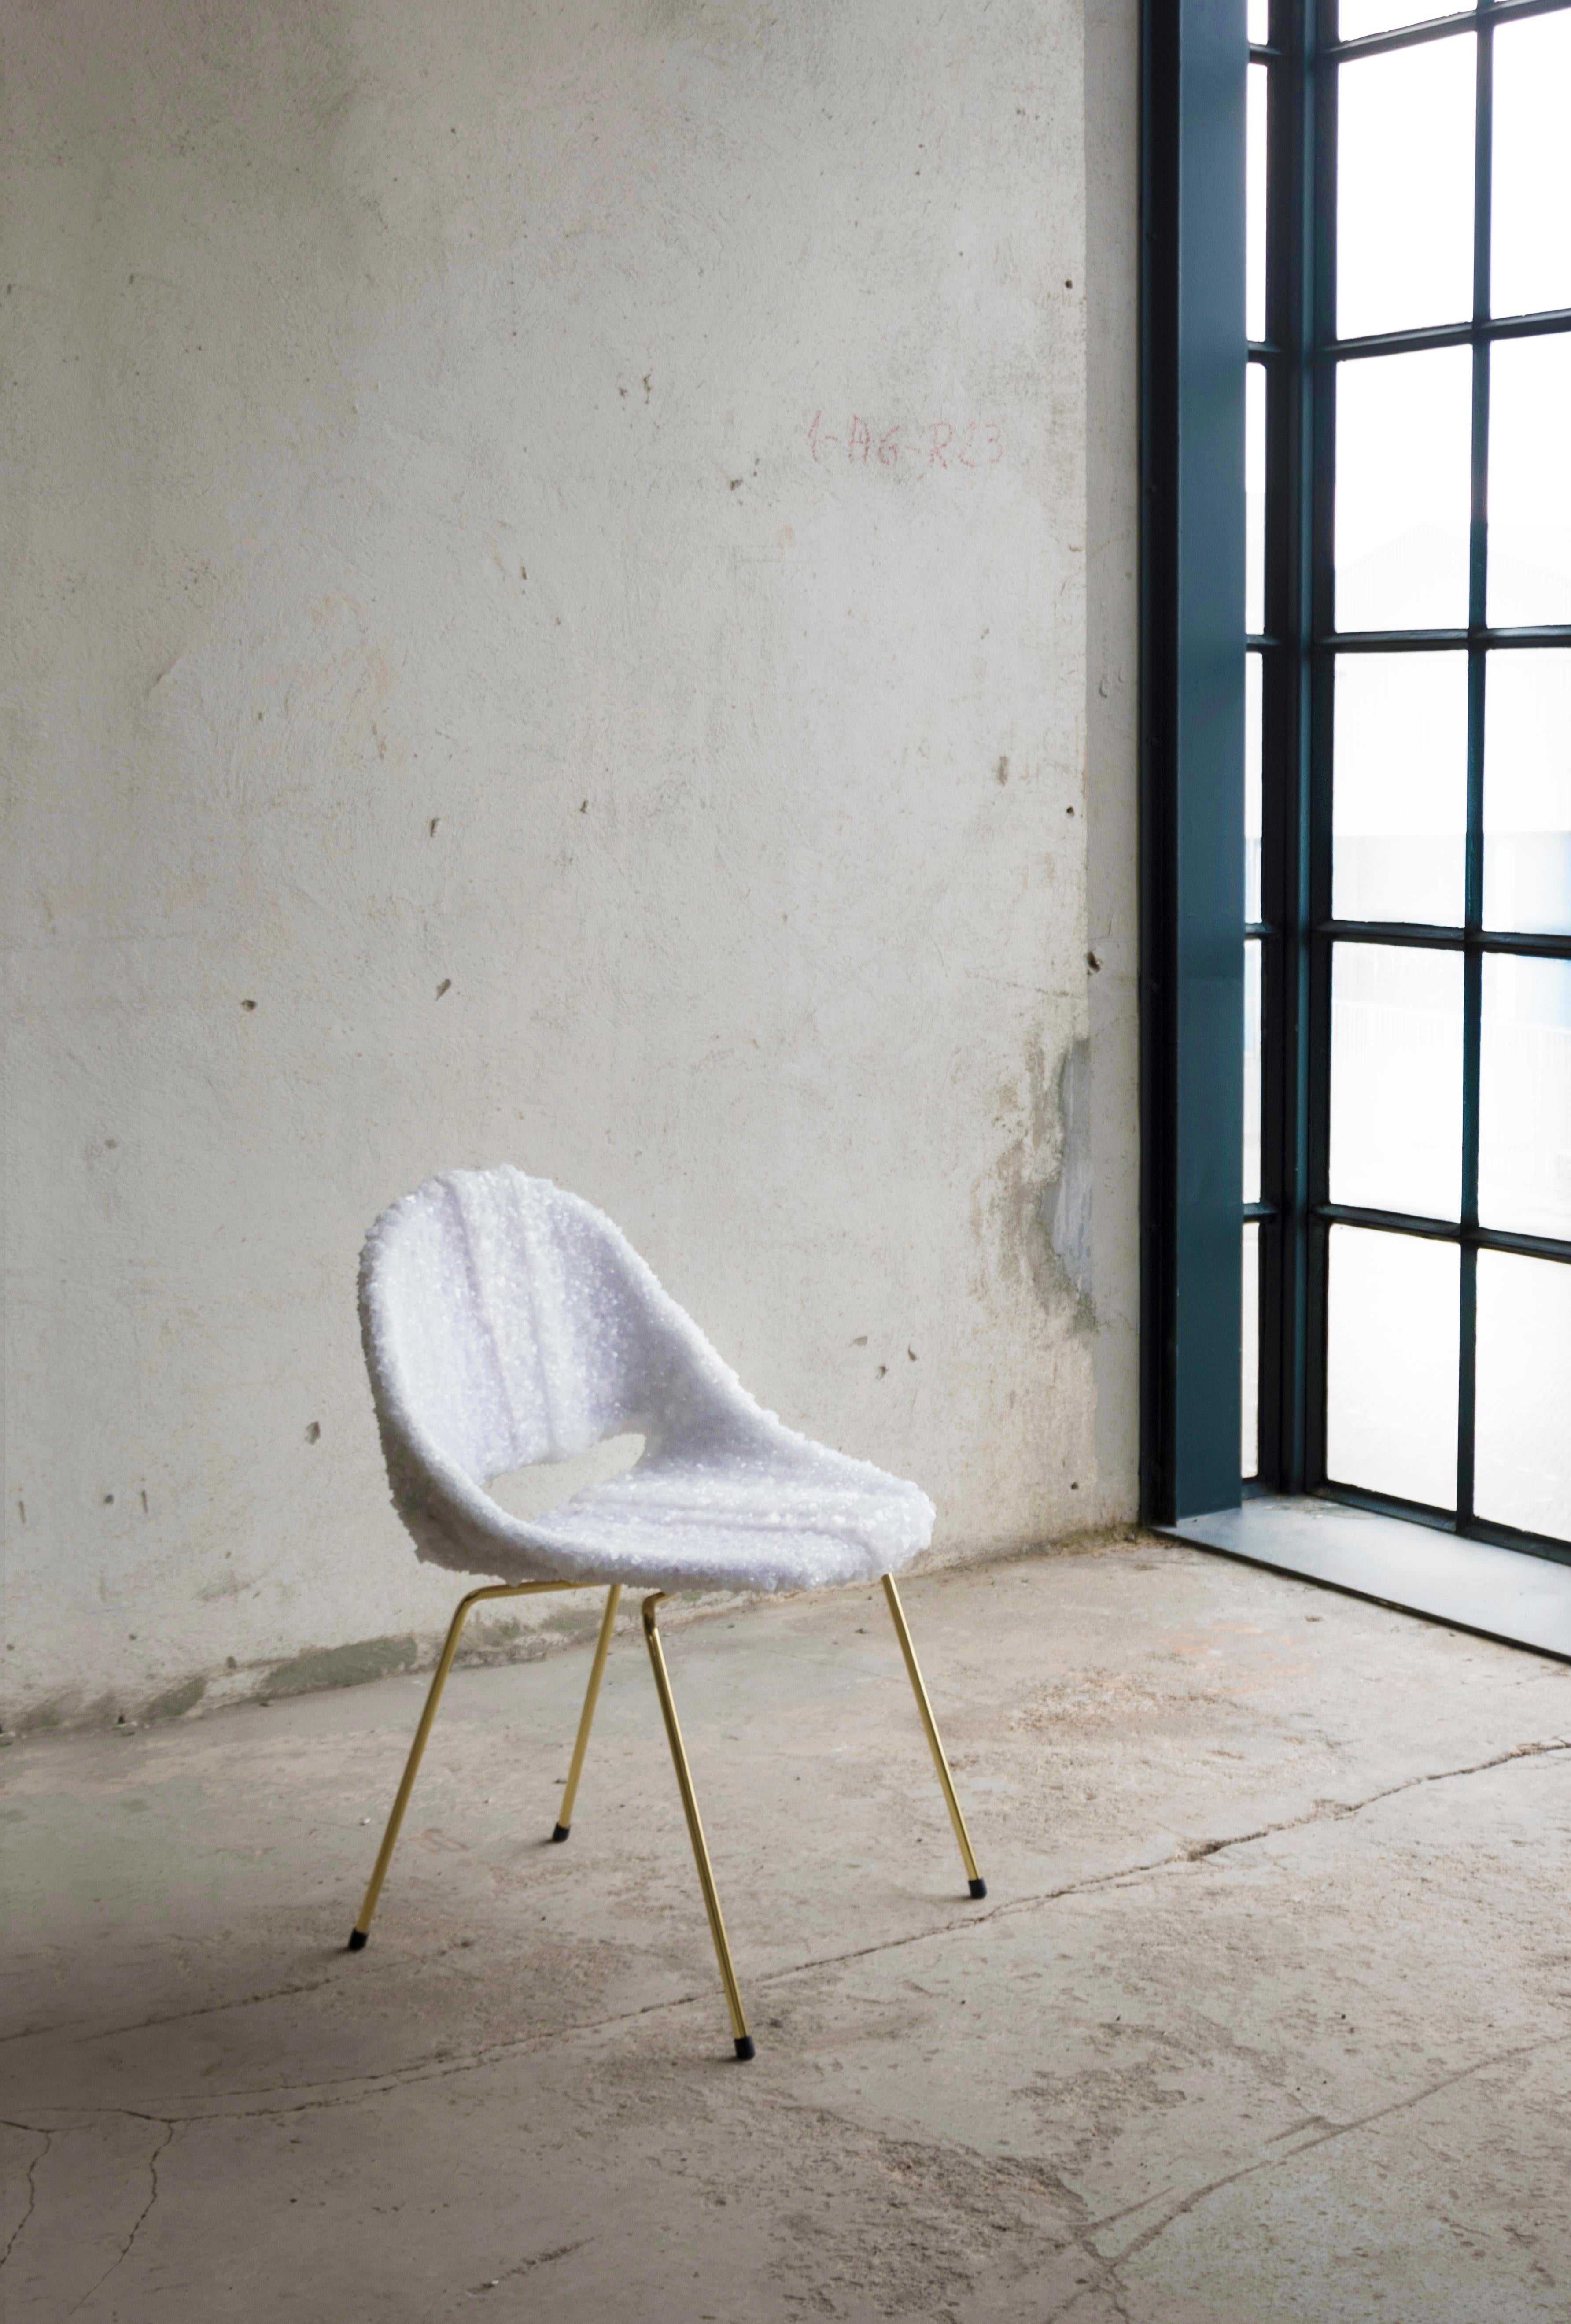 The Crystallized chair is a re-edition of a Belgian Mid-Century Modern chair. This crystallized edition is an ode to timeless design. The design is a tribute to Léon Stynen.

By dissolving a set of minerals in a big tank with water and slowly